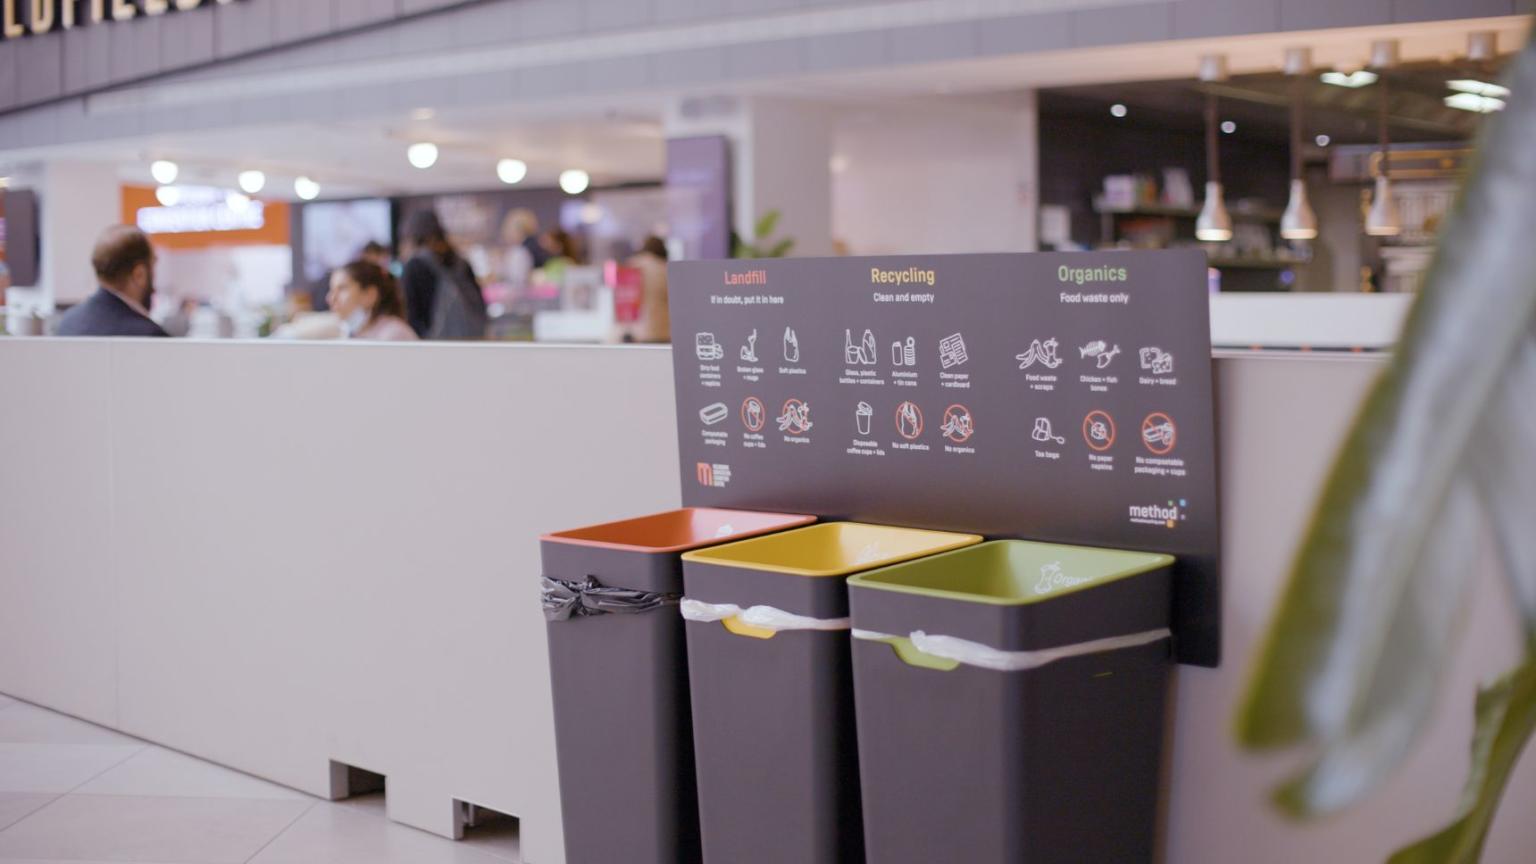 Event planners can reduce waste by implementing effective waste management practices.